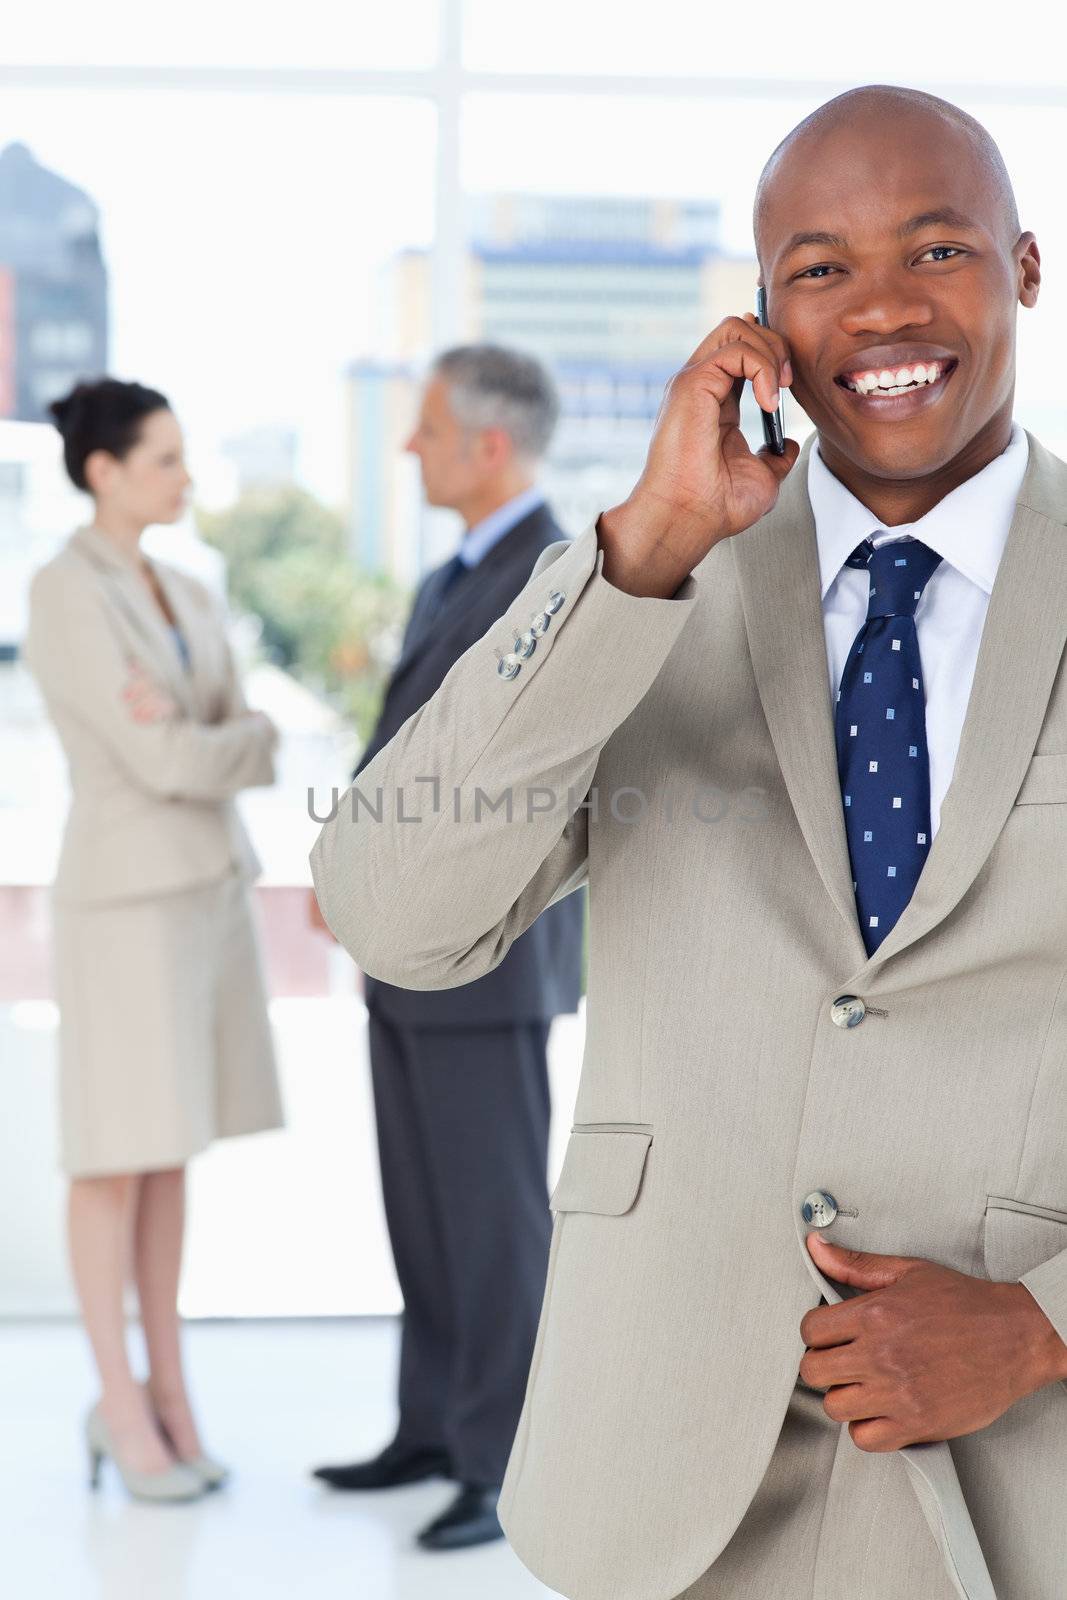 Manager using a mobile phone while unbuttoning his suit jacket by Wavebreakmedia